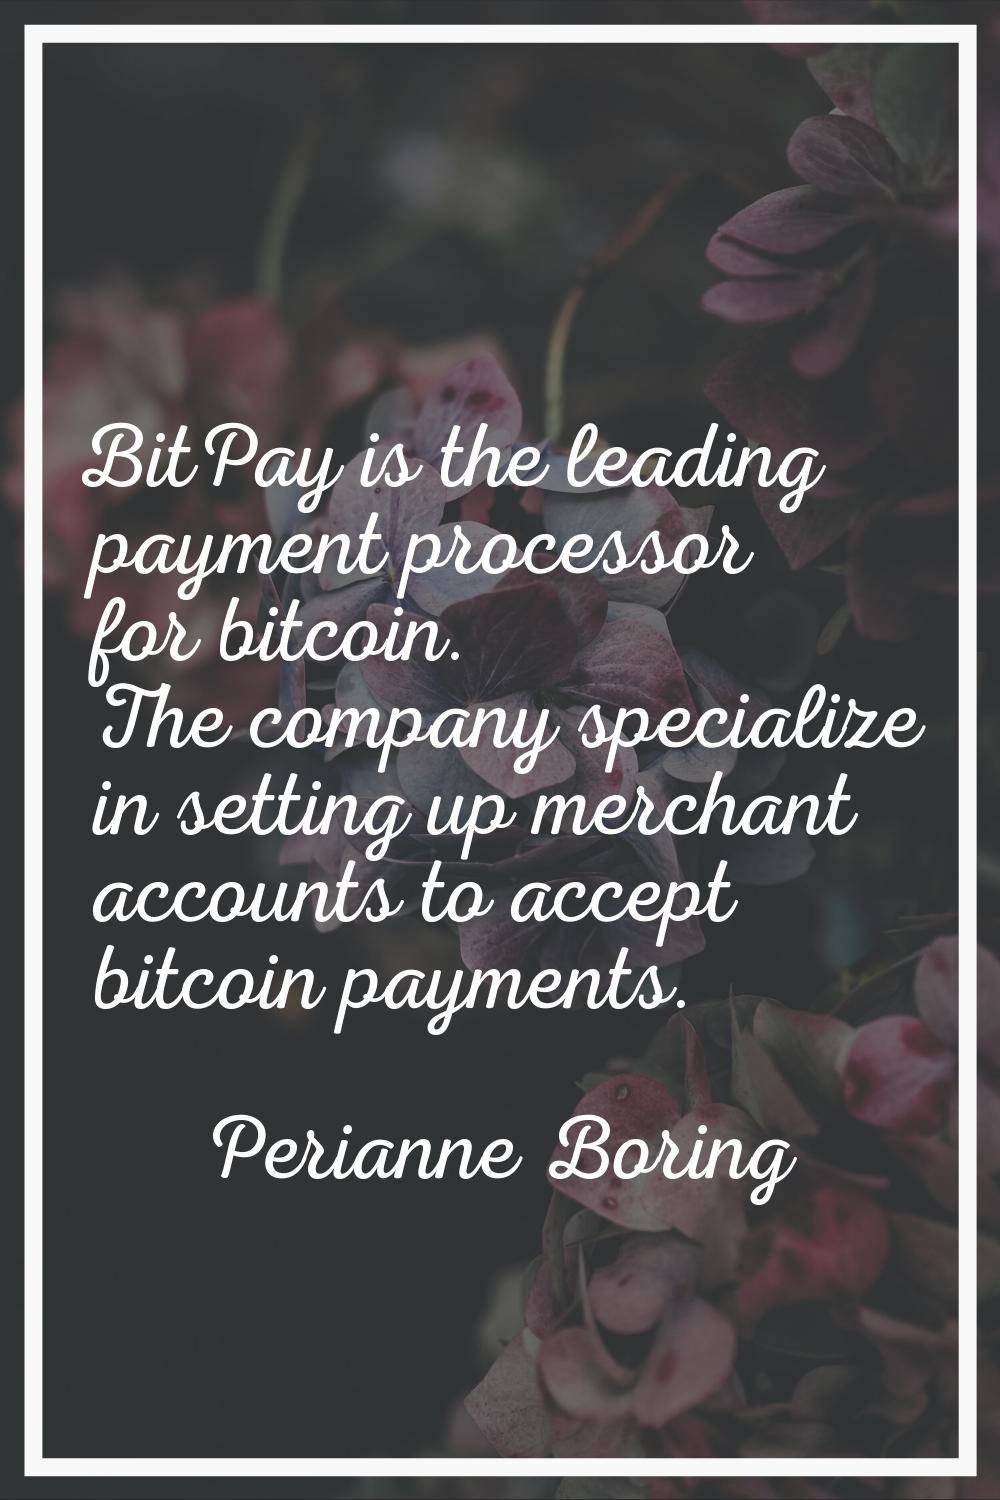 BitPay is the leading payment processor for bitcoin. The company specialize in setting up merchant 